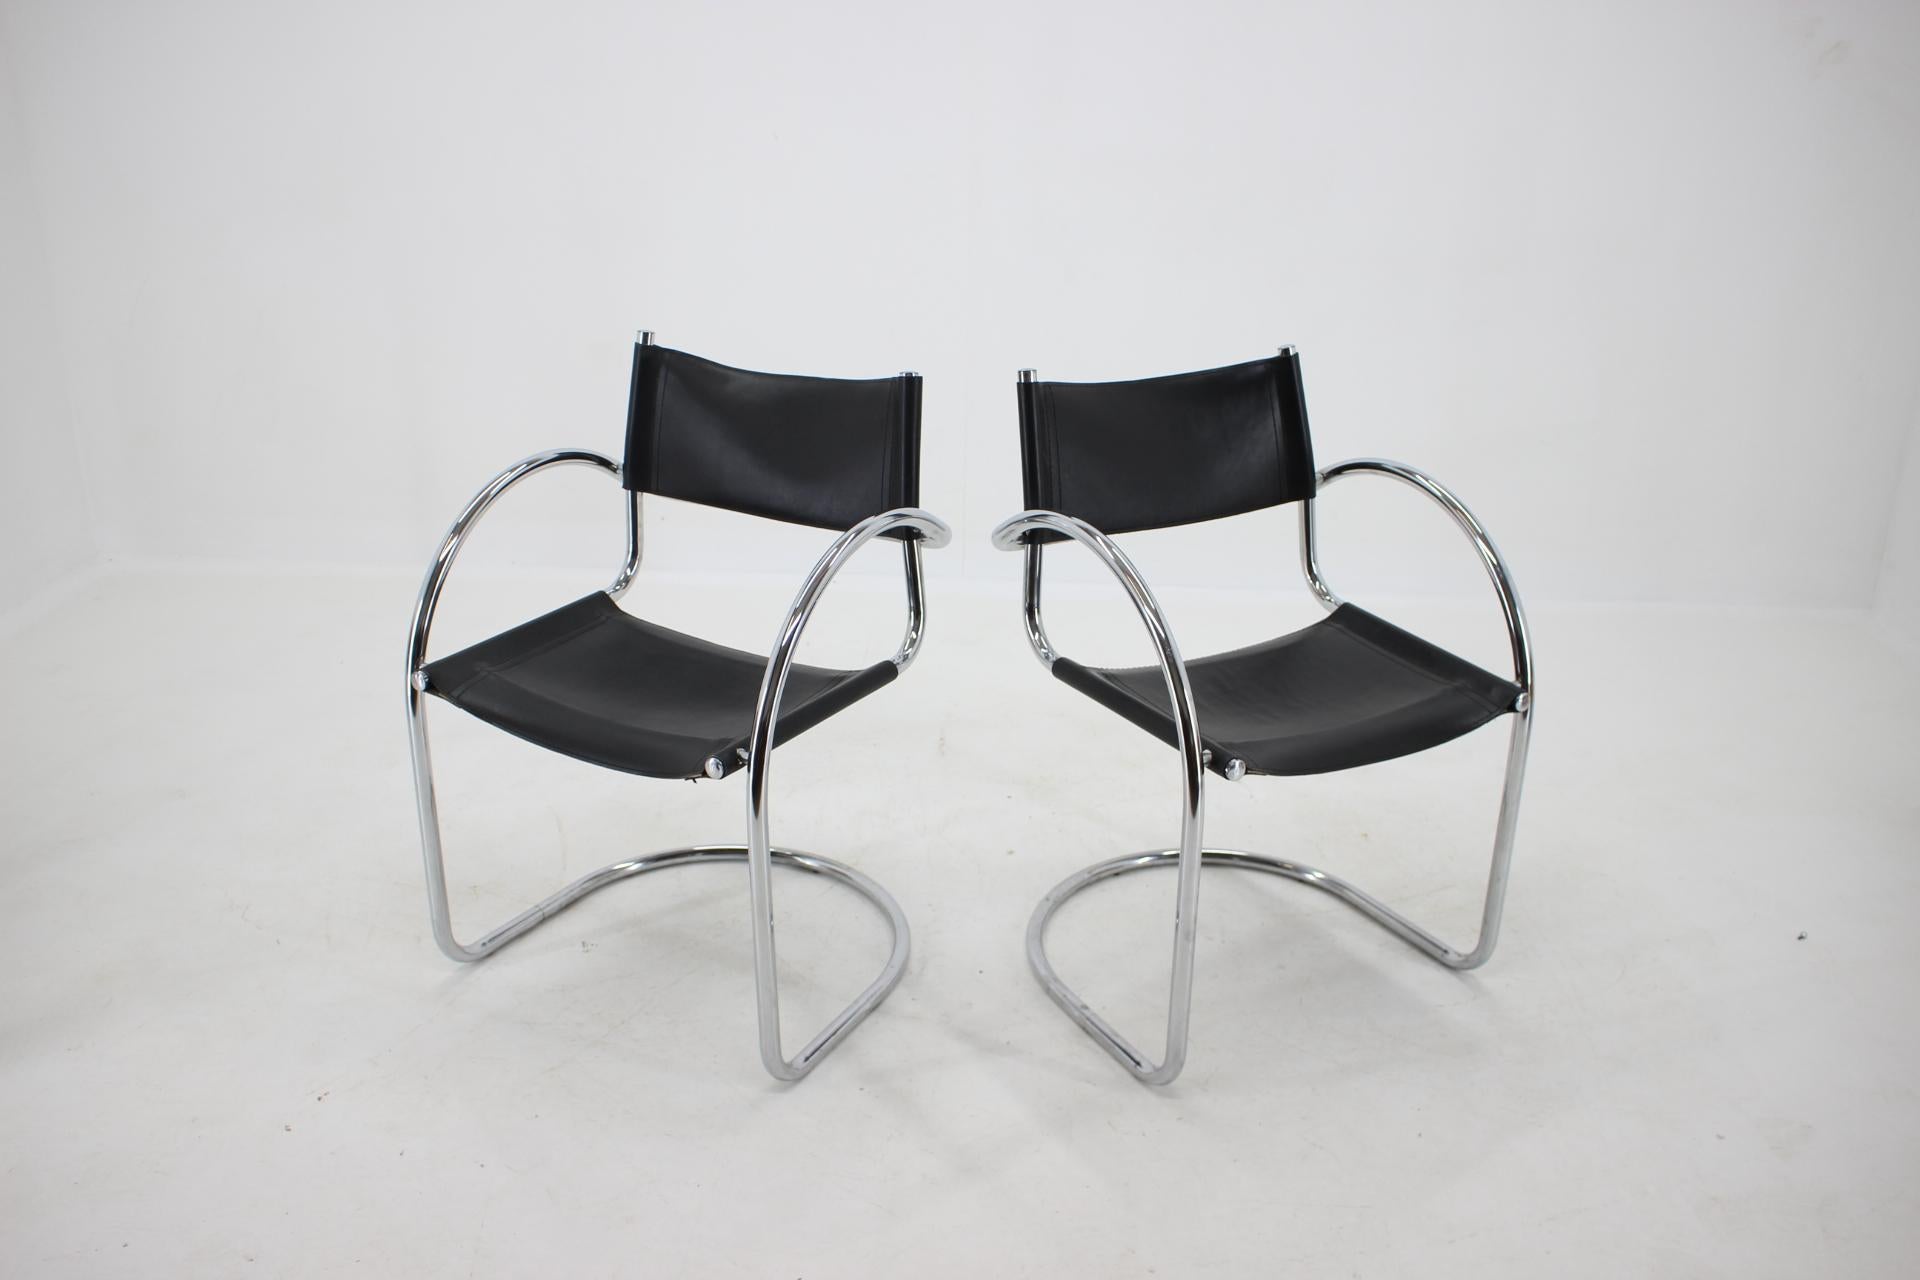 1970s Set of Four Chrome and Leather Tubular Chairs, Czechoslovakia In Good Condition For Sale In Praha, CZ